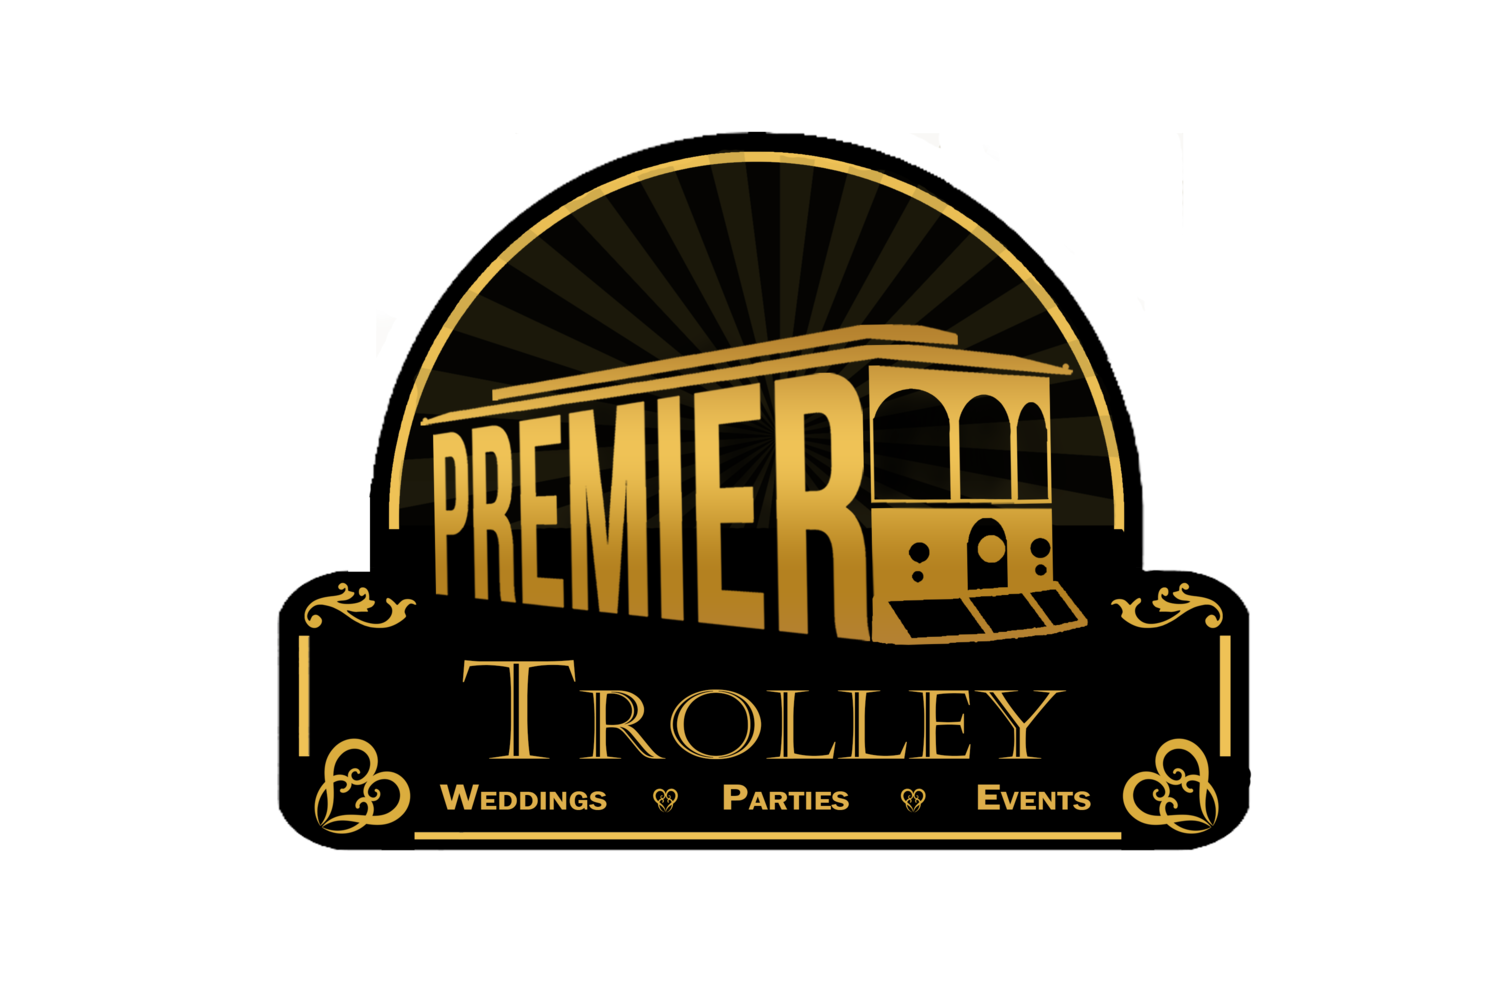 Premier Trolley of Chicago